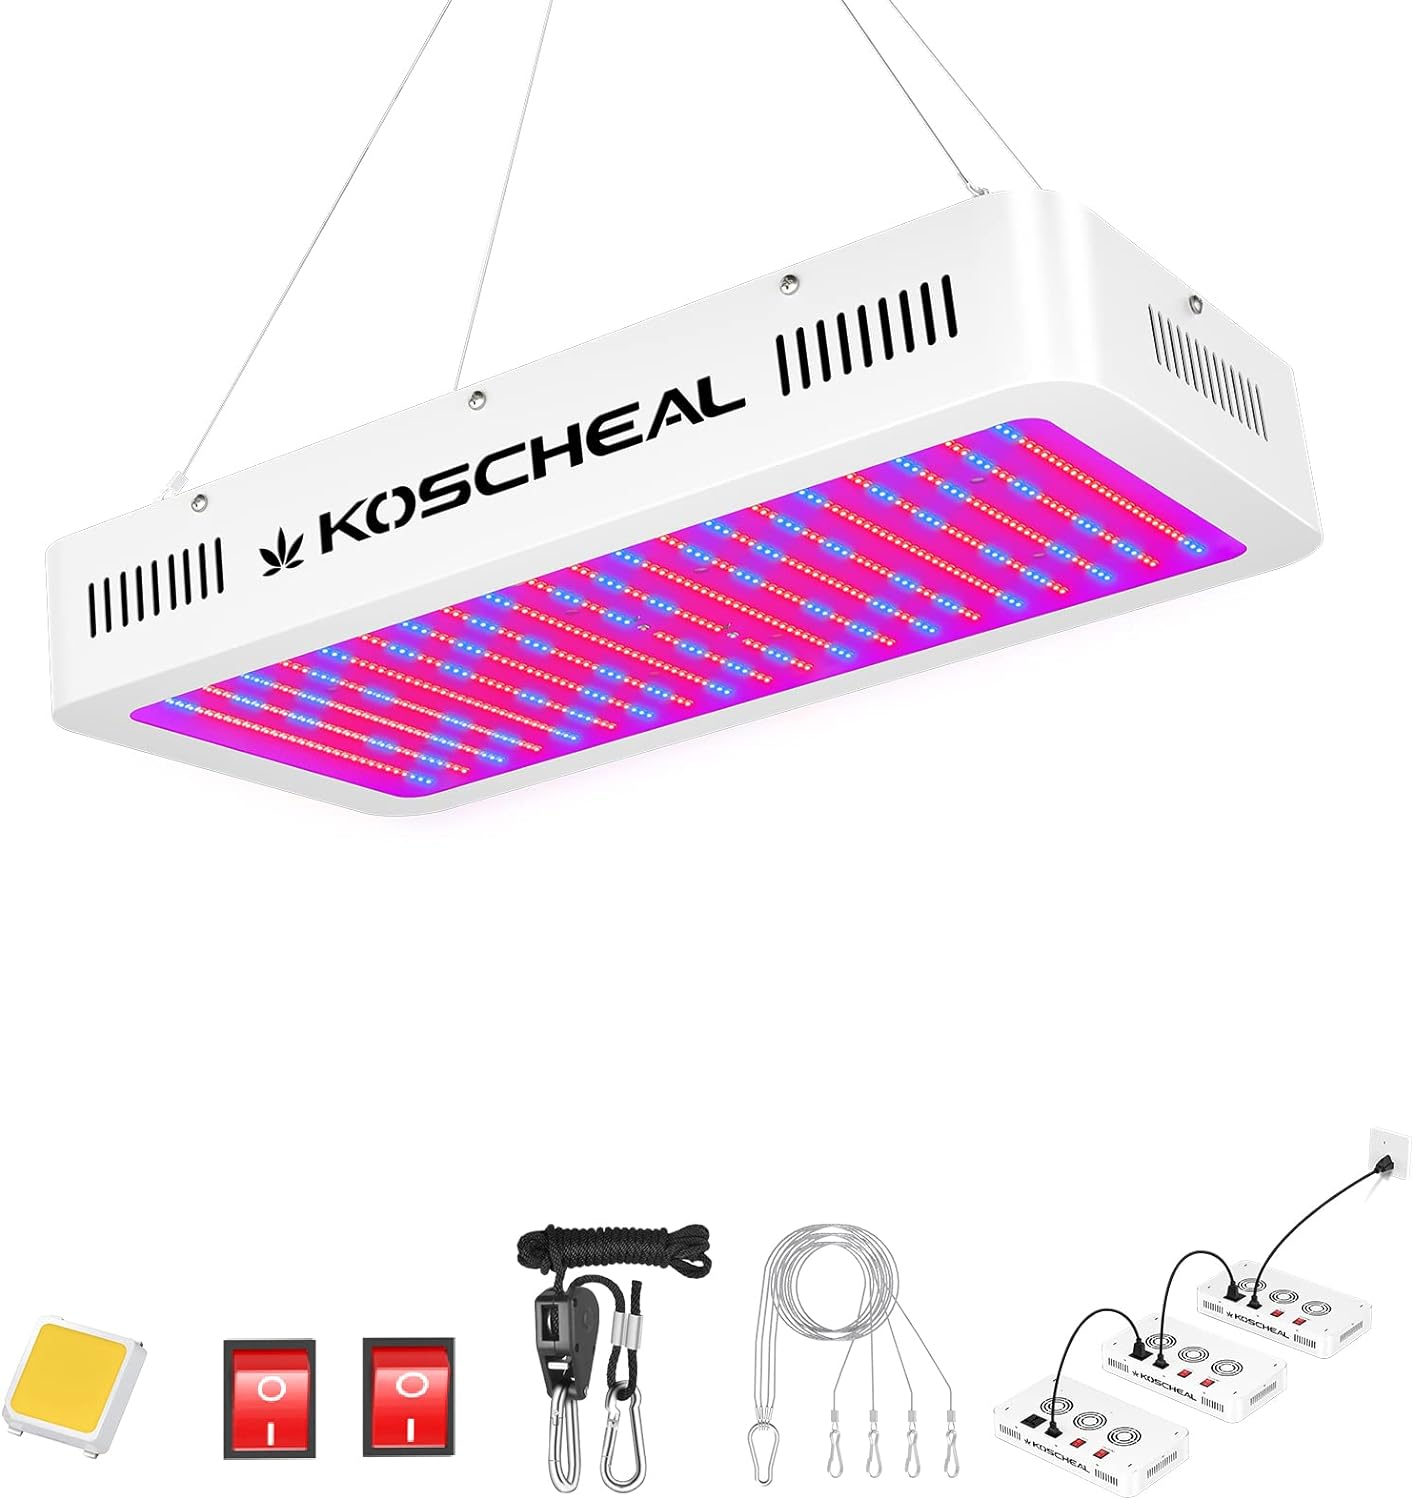 KOSCHEAL LED Grow Light Full Spectrum 2000W, Plant Grow Light with Veg & Bloom Switch for Hydroponic Indoor Plants LED Grow Lamp with Daisy Chain